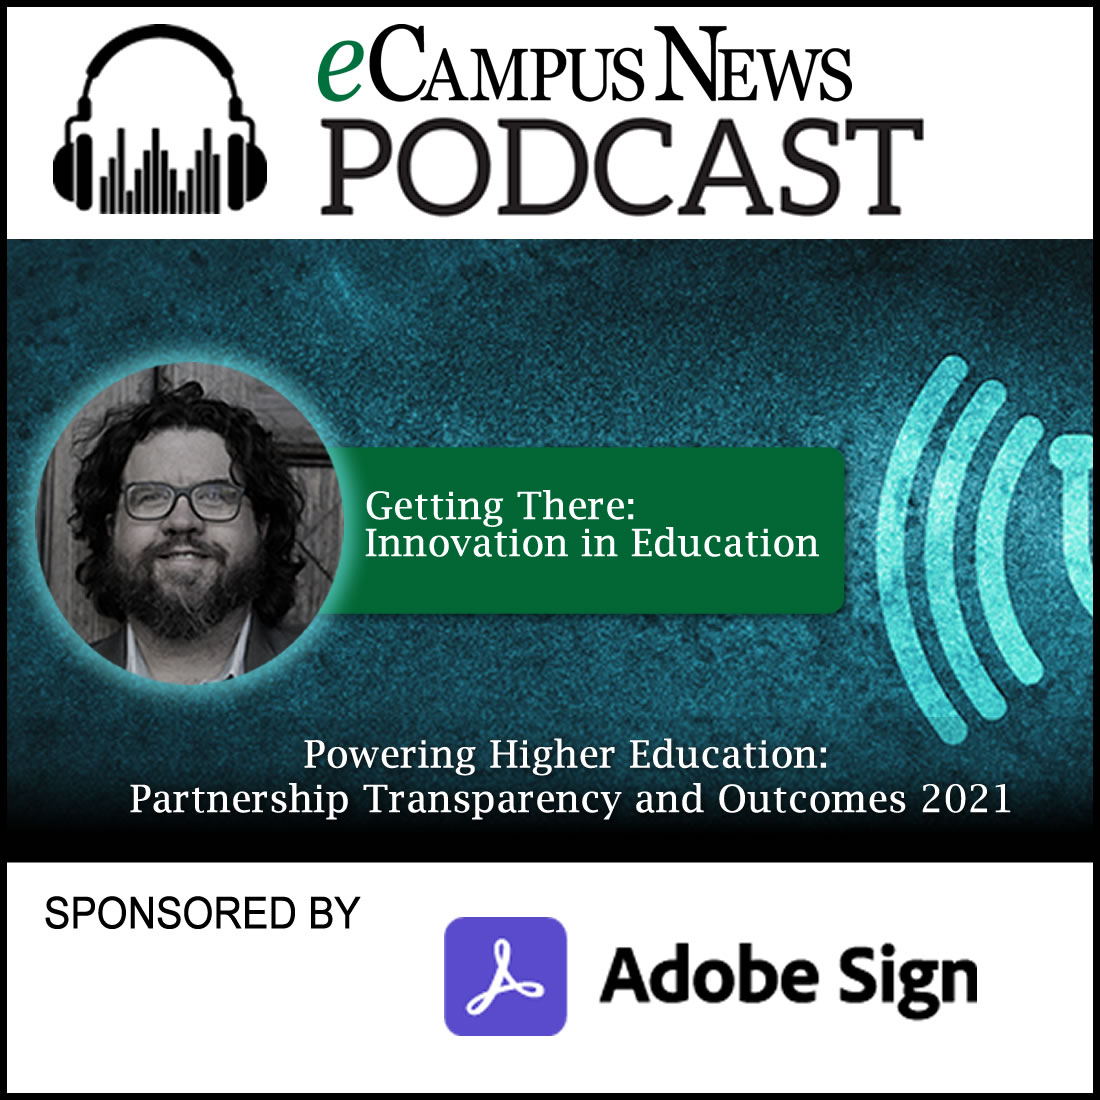 Powering Higher Education: Partnership Transparency and Outcomes 2021